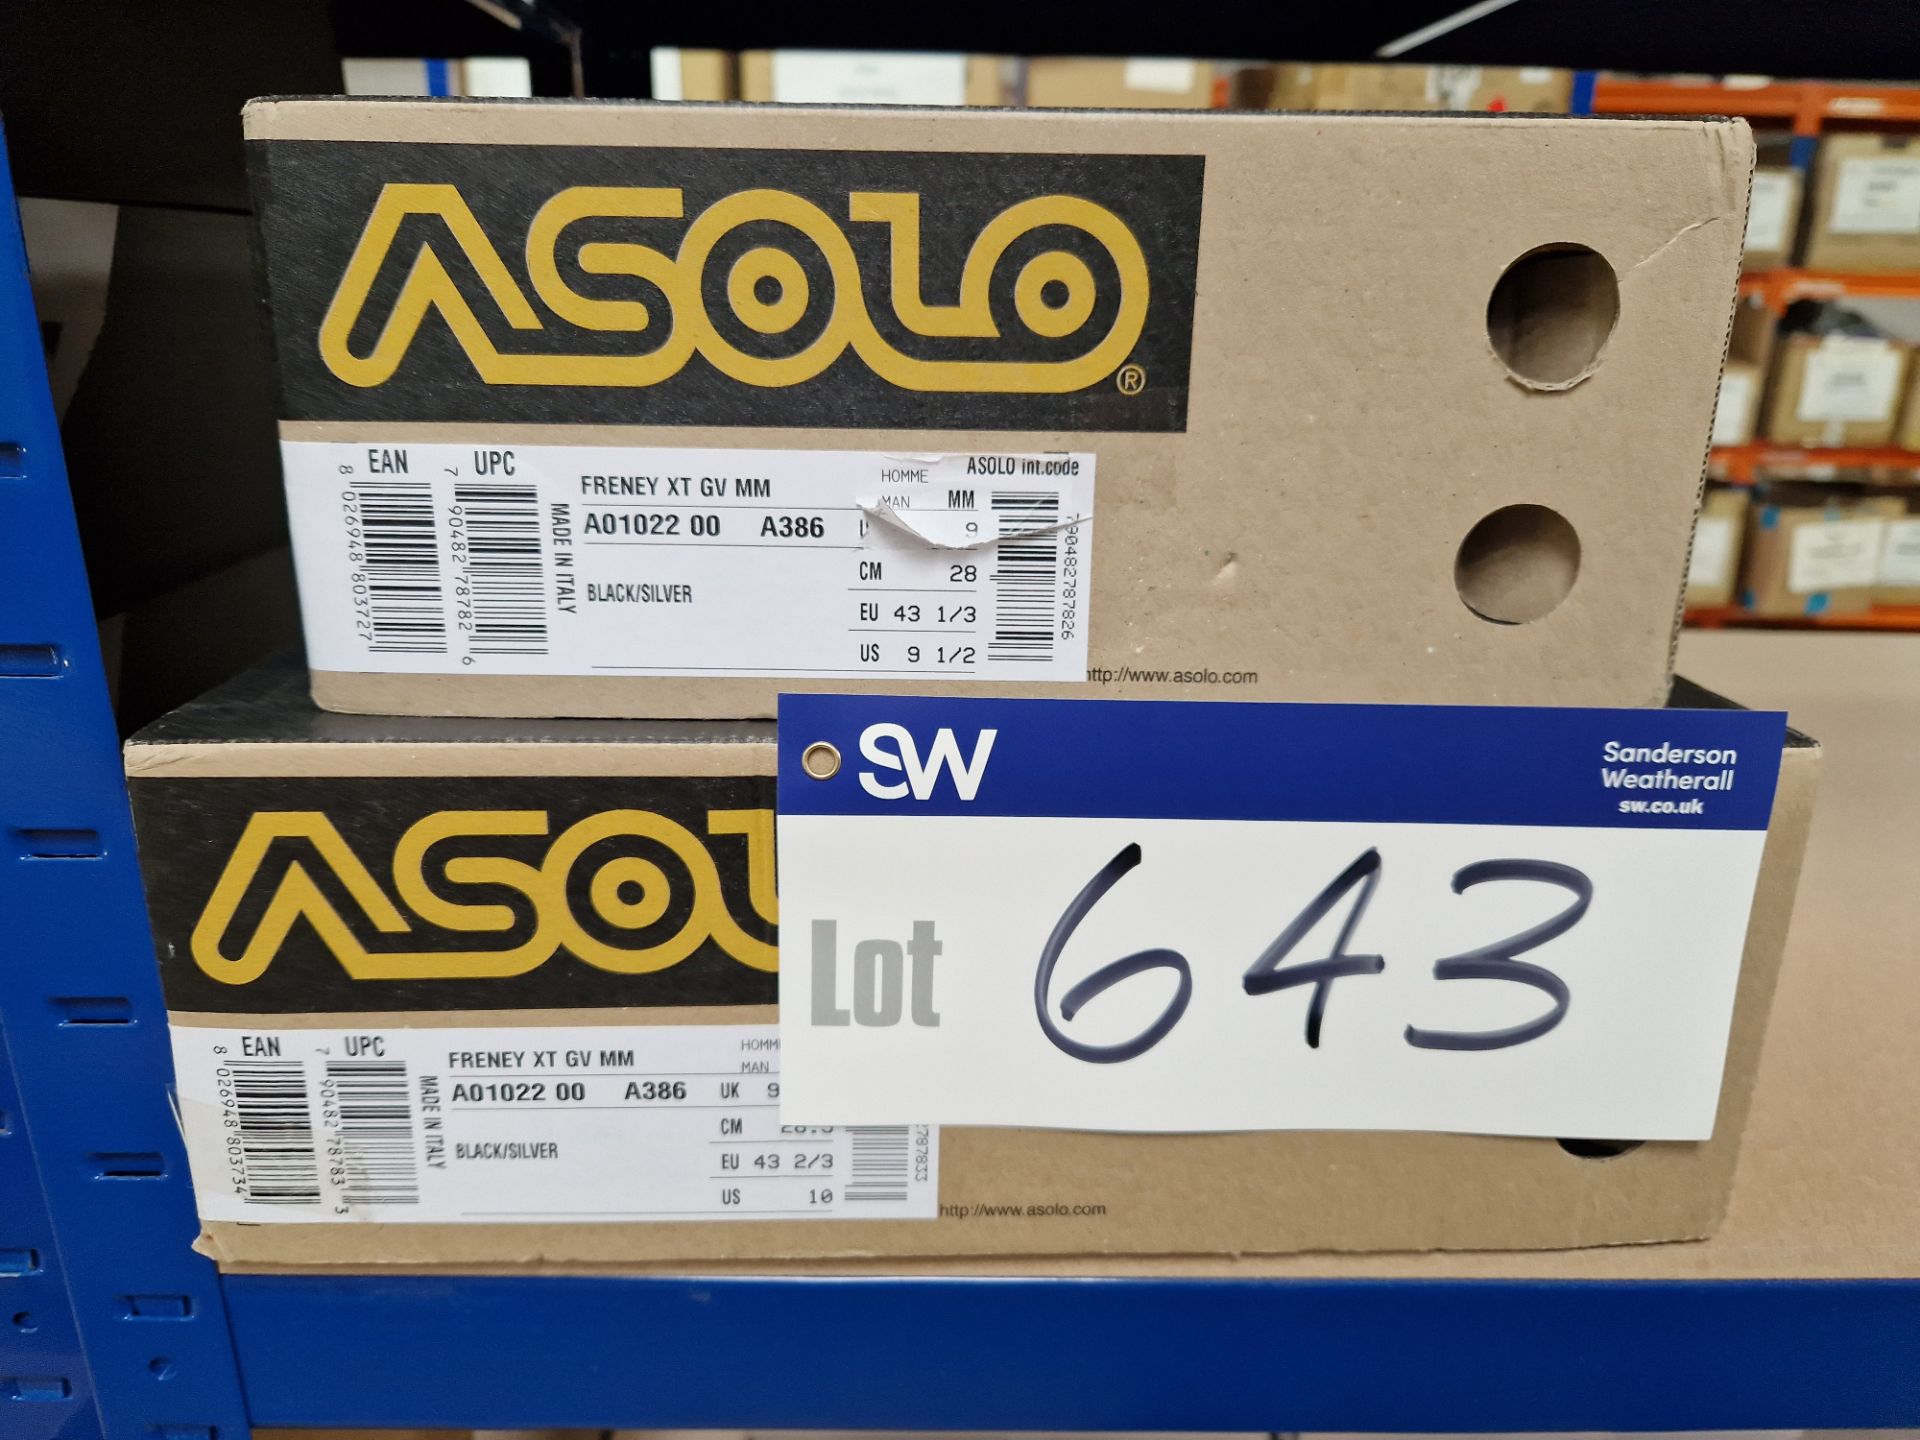 Two Pairs of Asolo Freney XT GV MM Boots, Colour: Black/Silver, Sizes: 9 UK Please read the